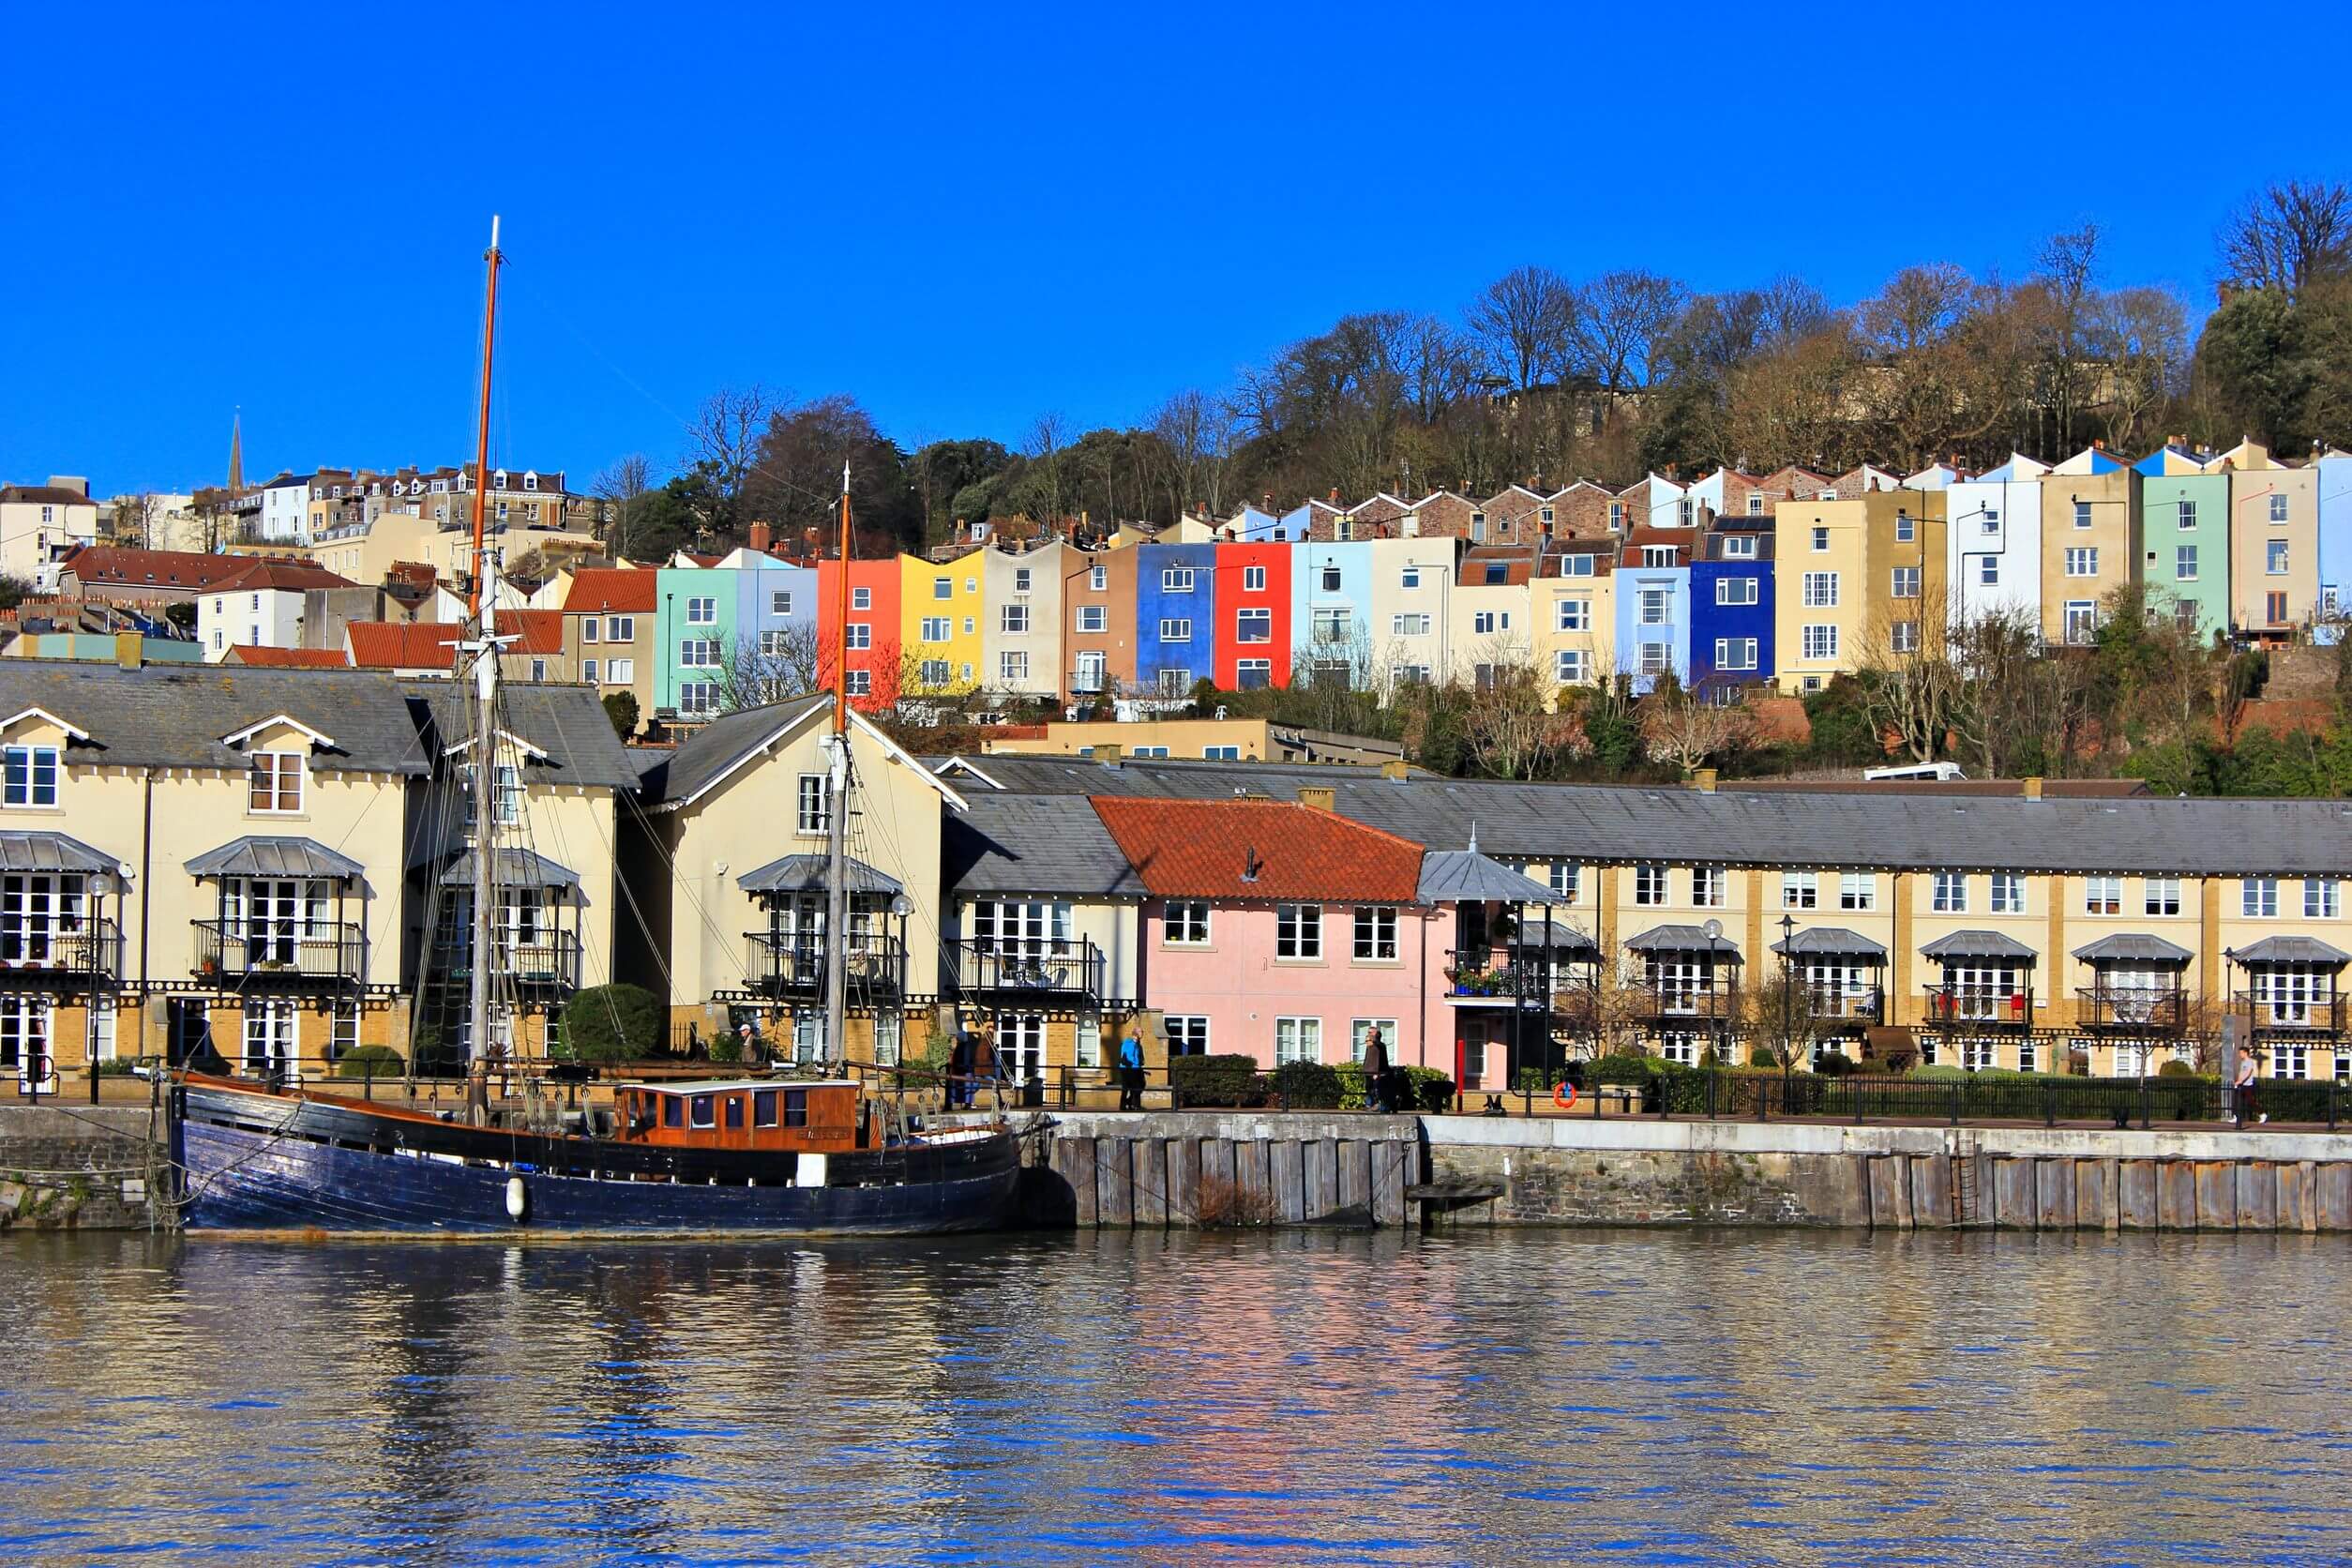 The Best Day Out in Bristol Itinerary For You